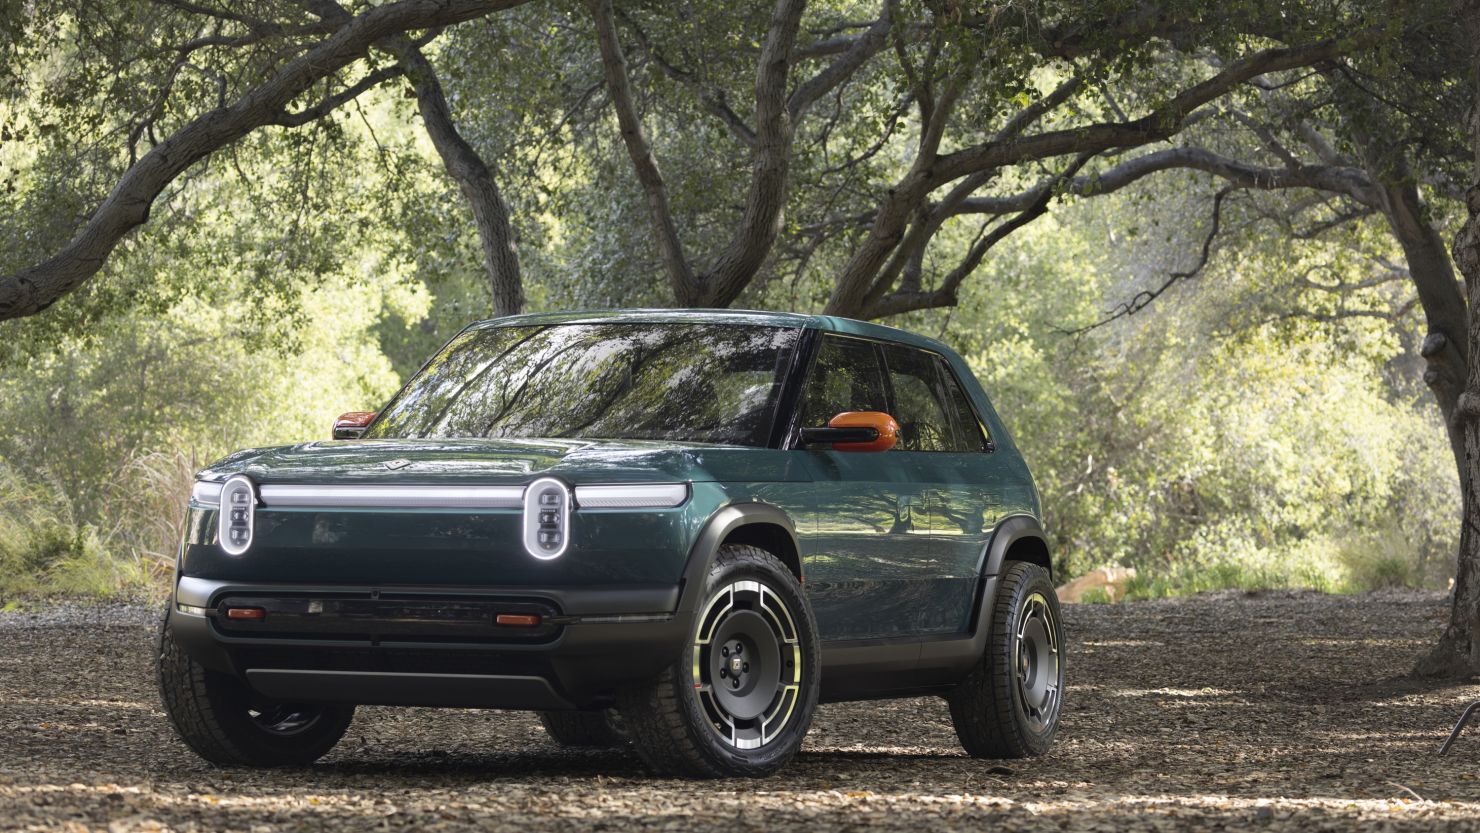 The Rivian R2 and R3 are Rivian’s smaller, more affordable off-road EVs